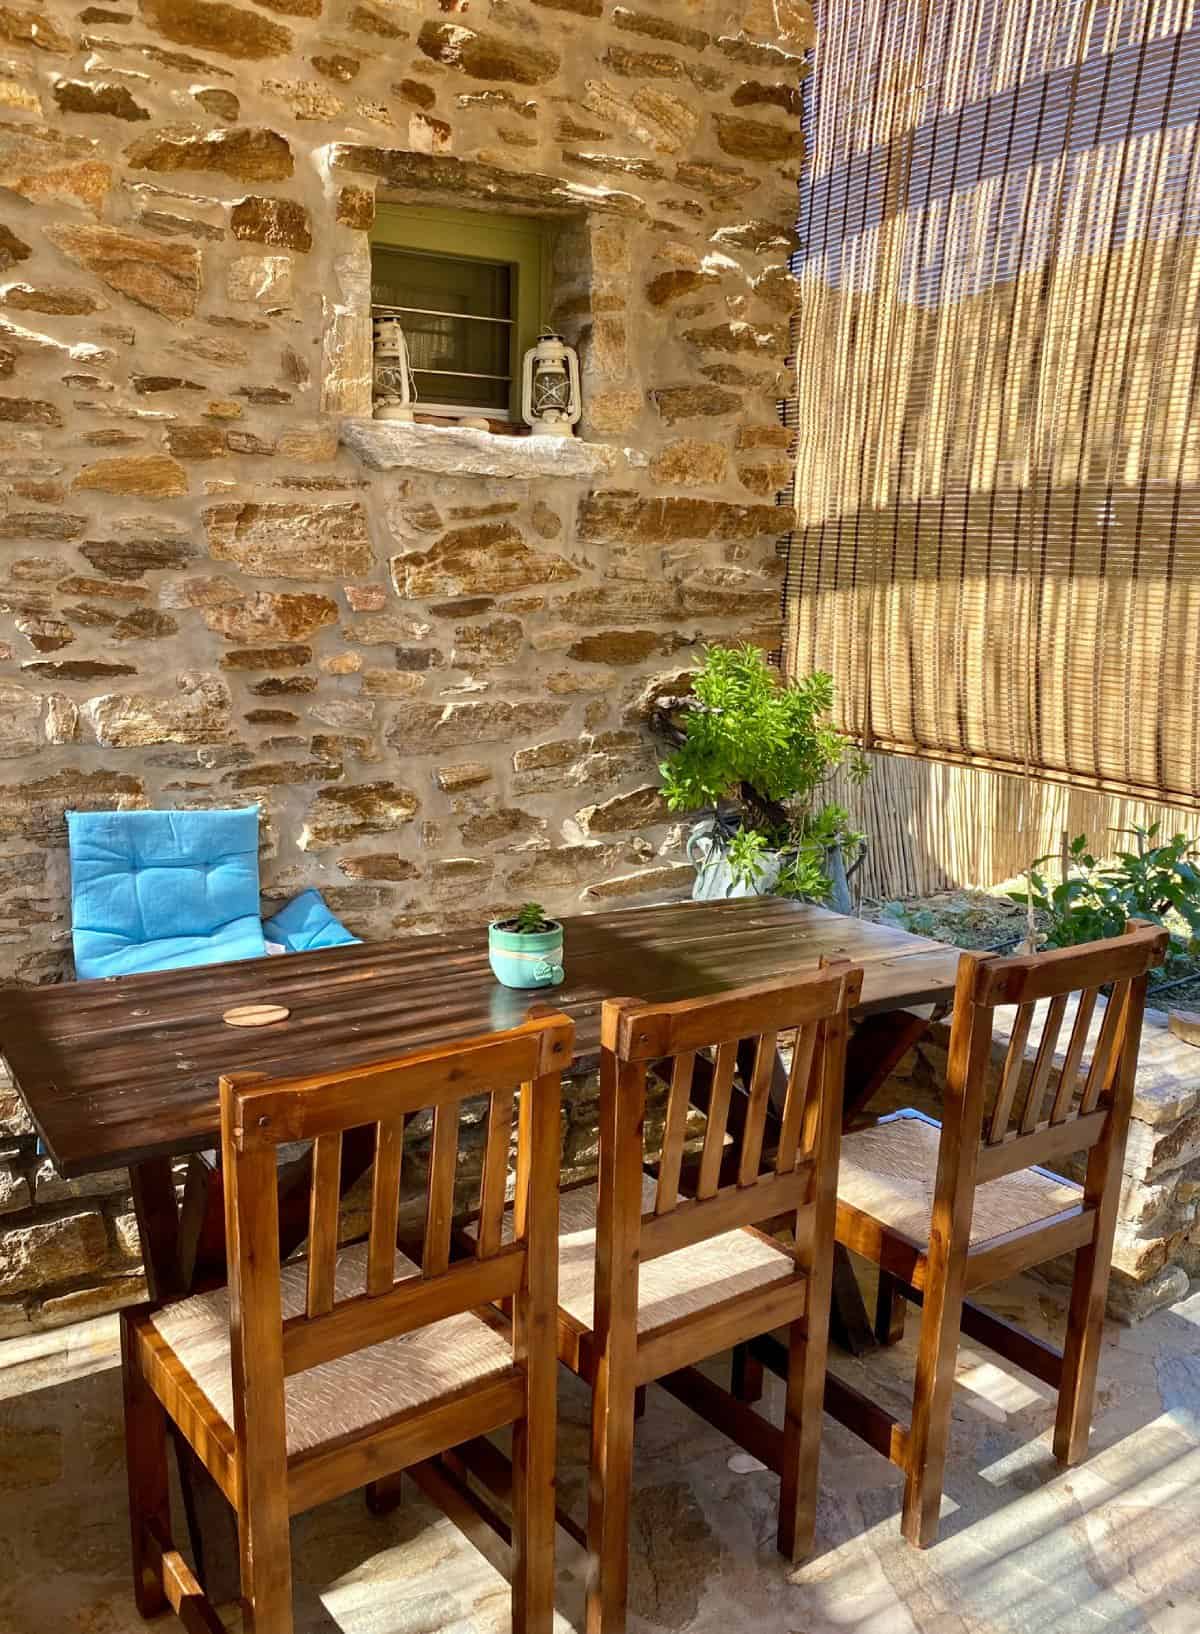 Things to see in Naxos - guide to planning a Naxos roadtrip itinerary - stop in at tiny Saint Anna Winery